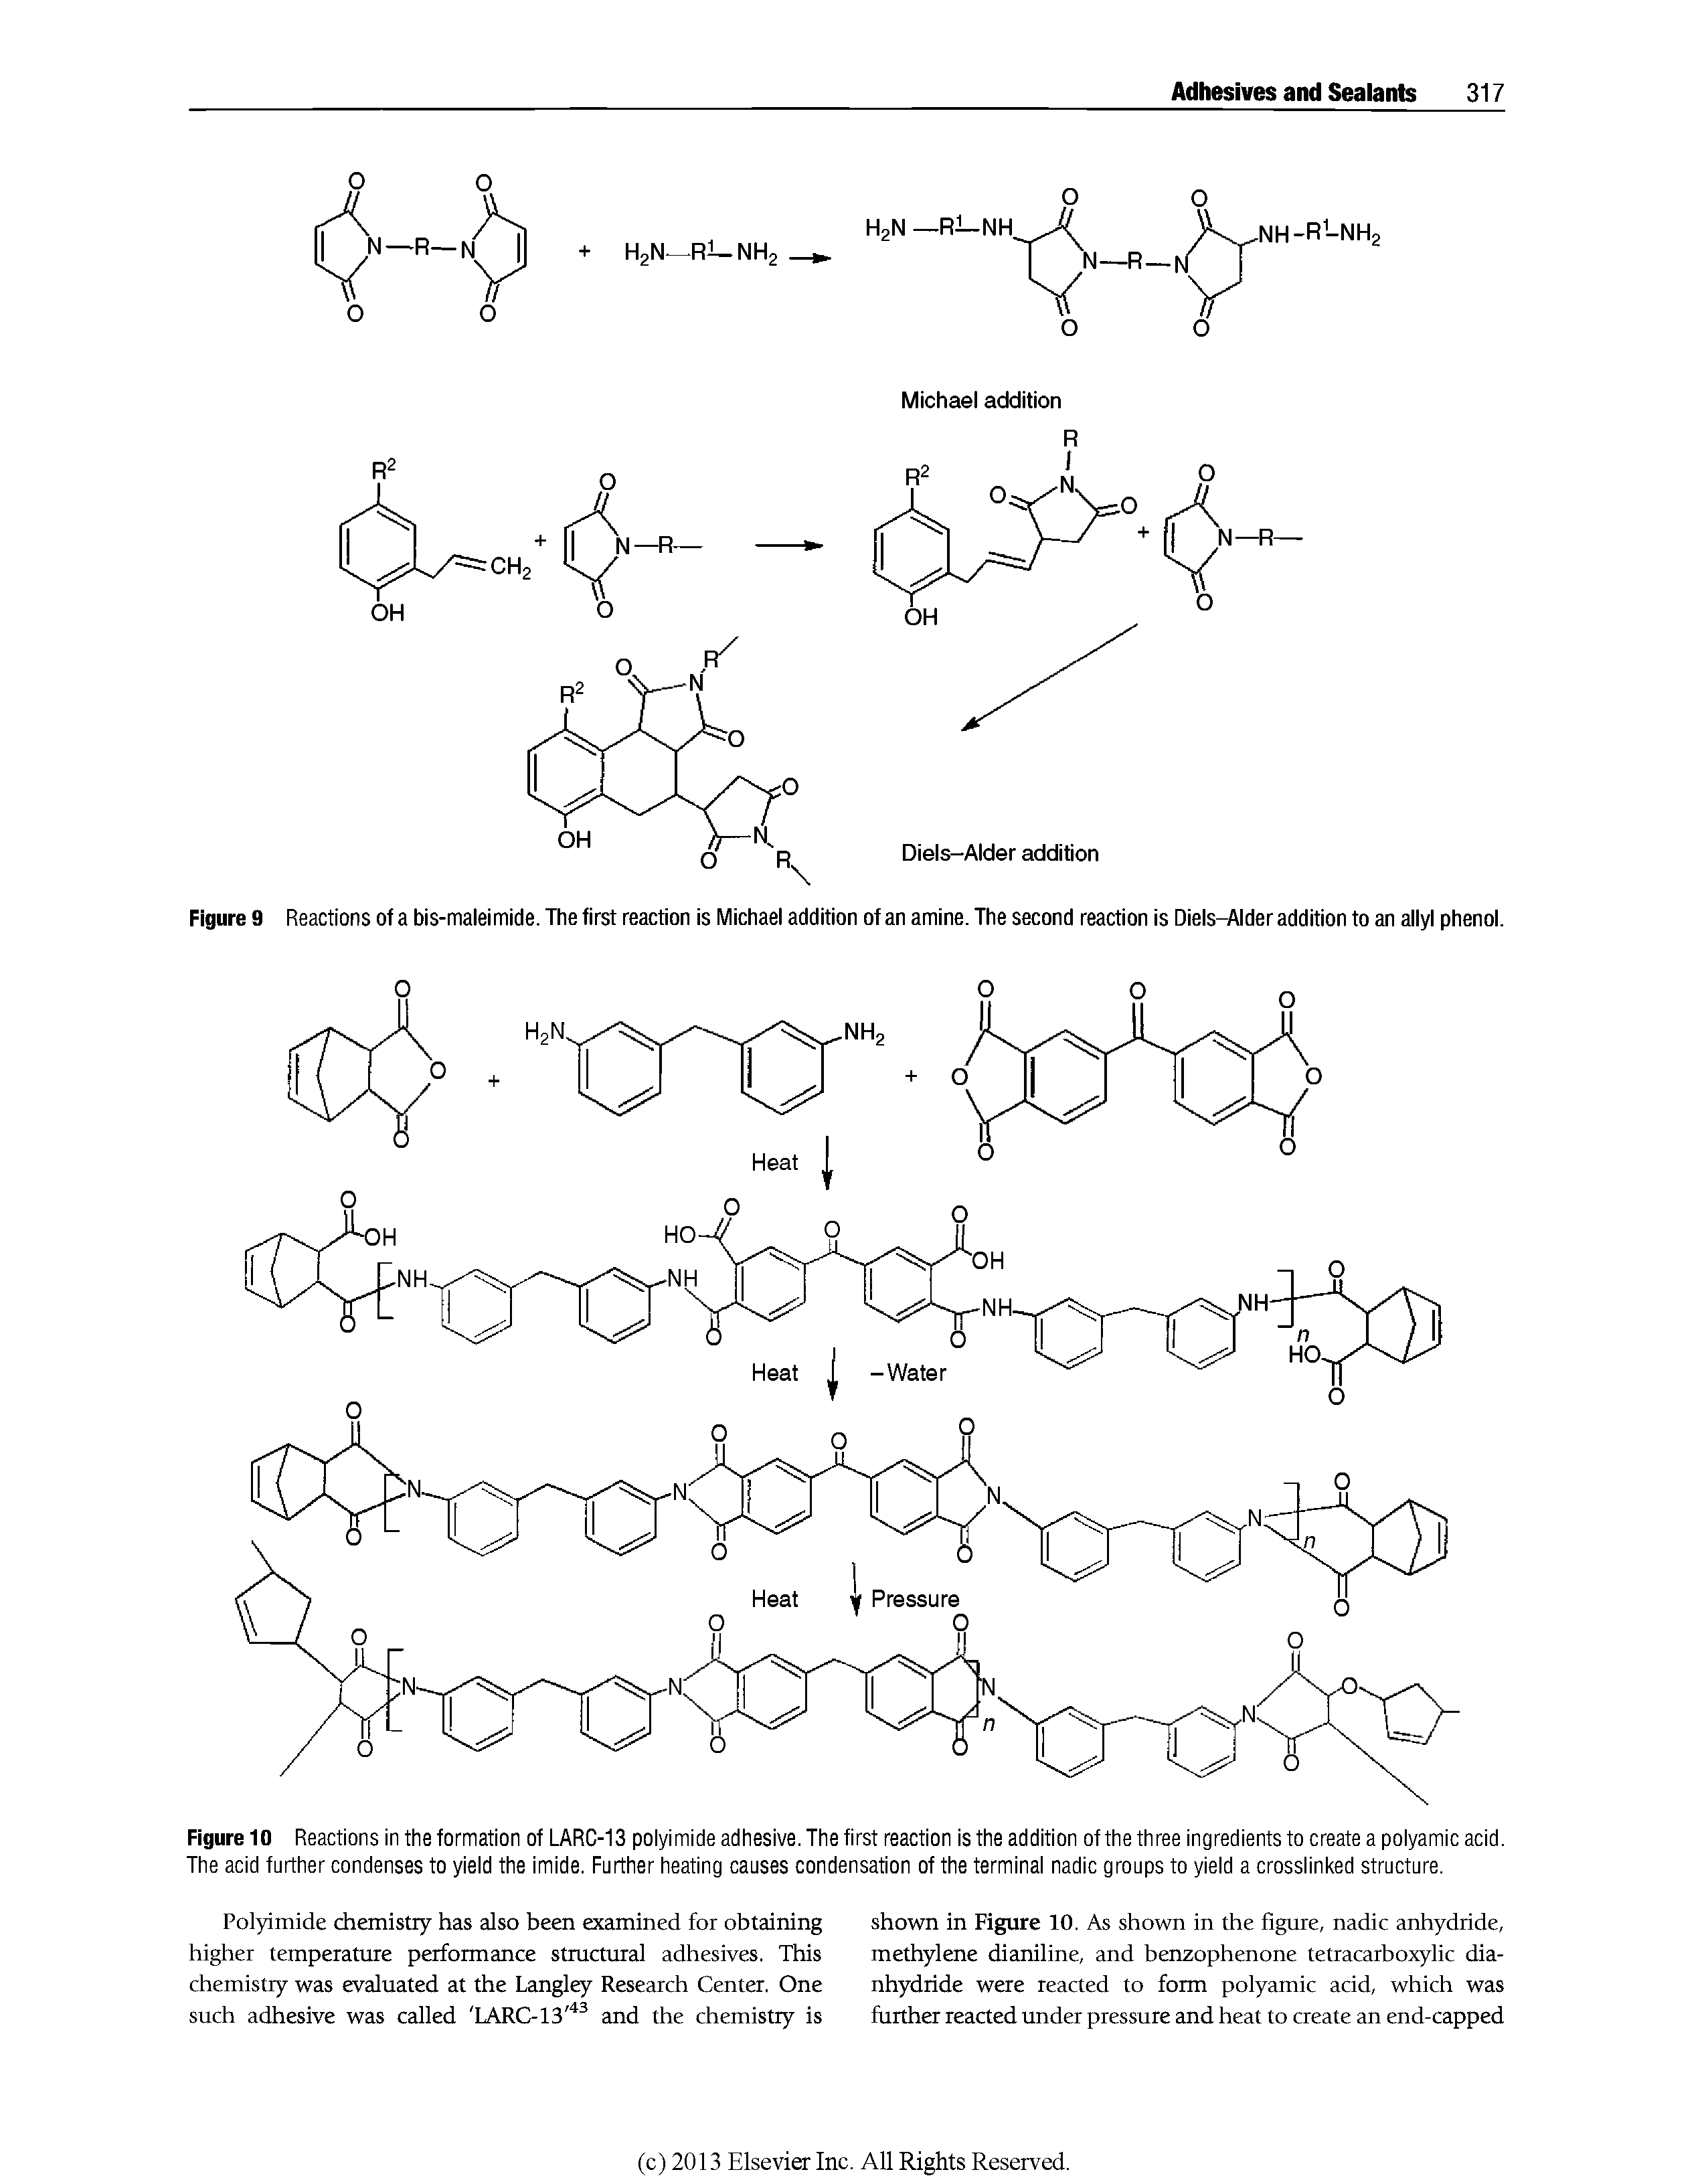 Figure 10 Reactions in the formation of LARC-13 polyimide adhesive. The first reaction is the addition of the three ingredients to create a polyamic acid. The acid further condenses to yieid the imide. Further heating causes condensation of the terminal nadic groups to yield a crosslinked structure.